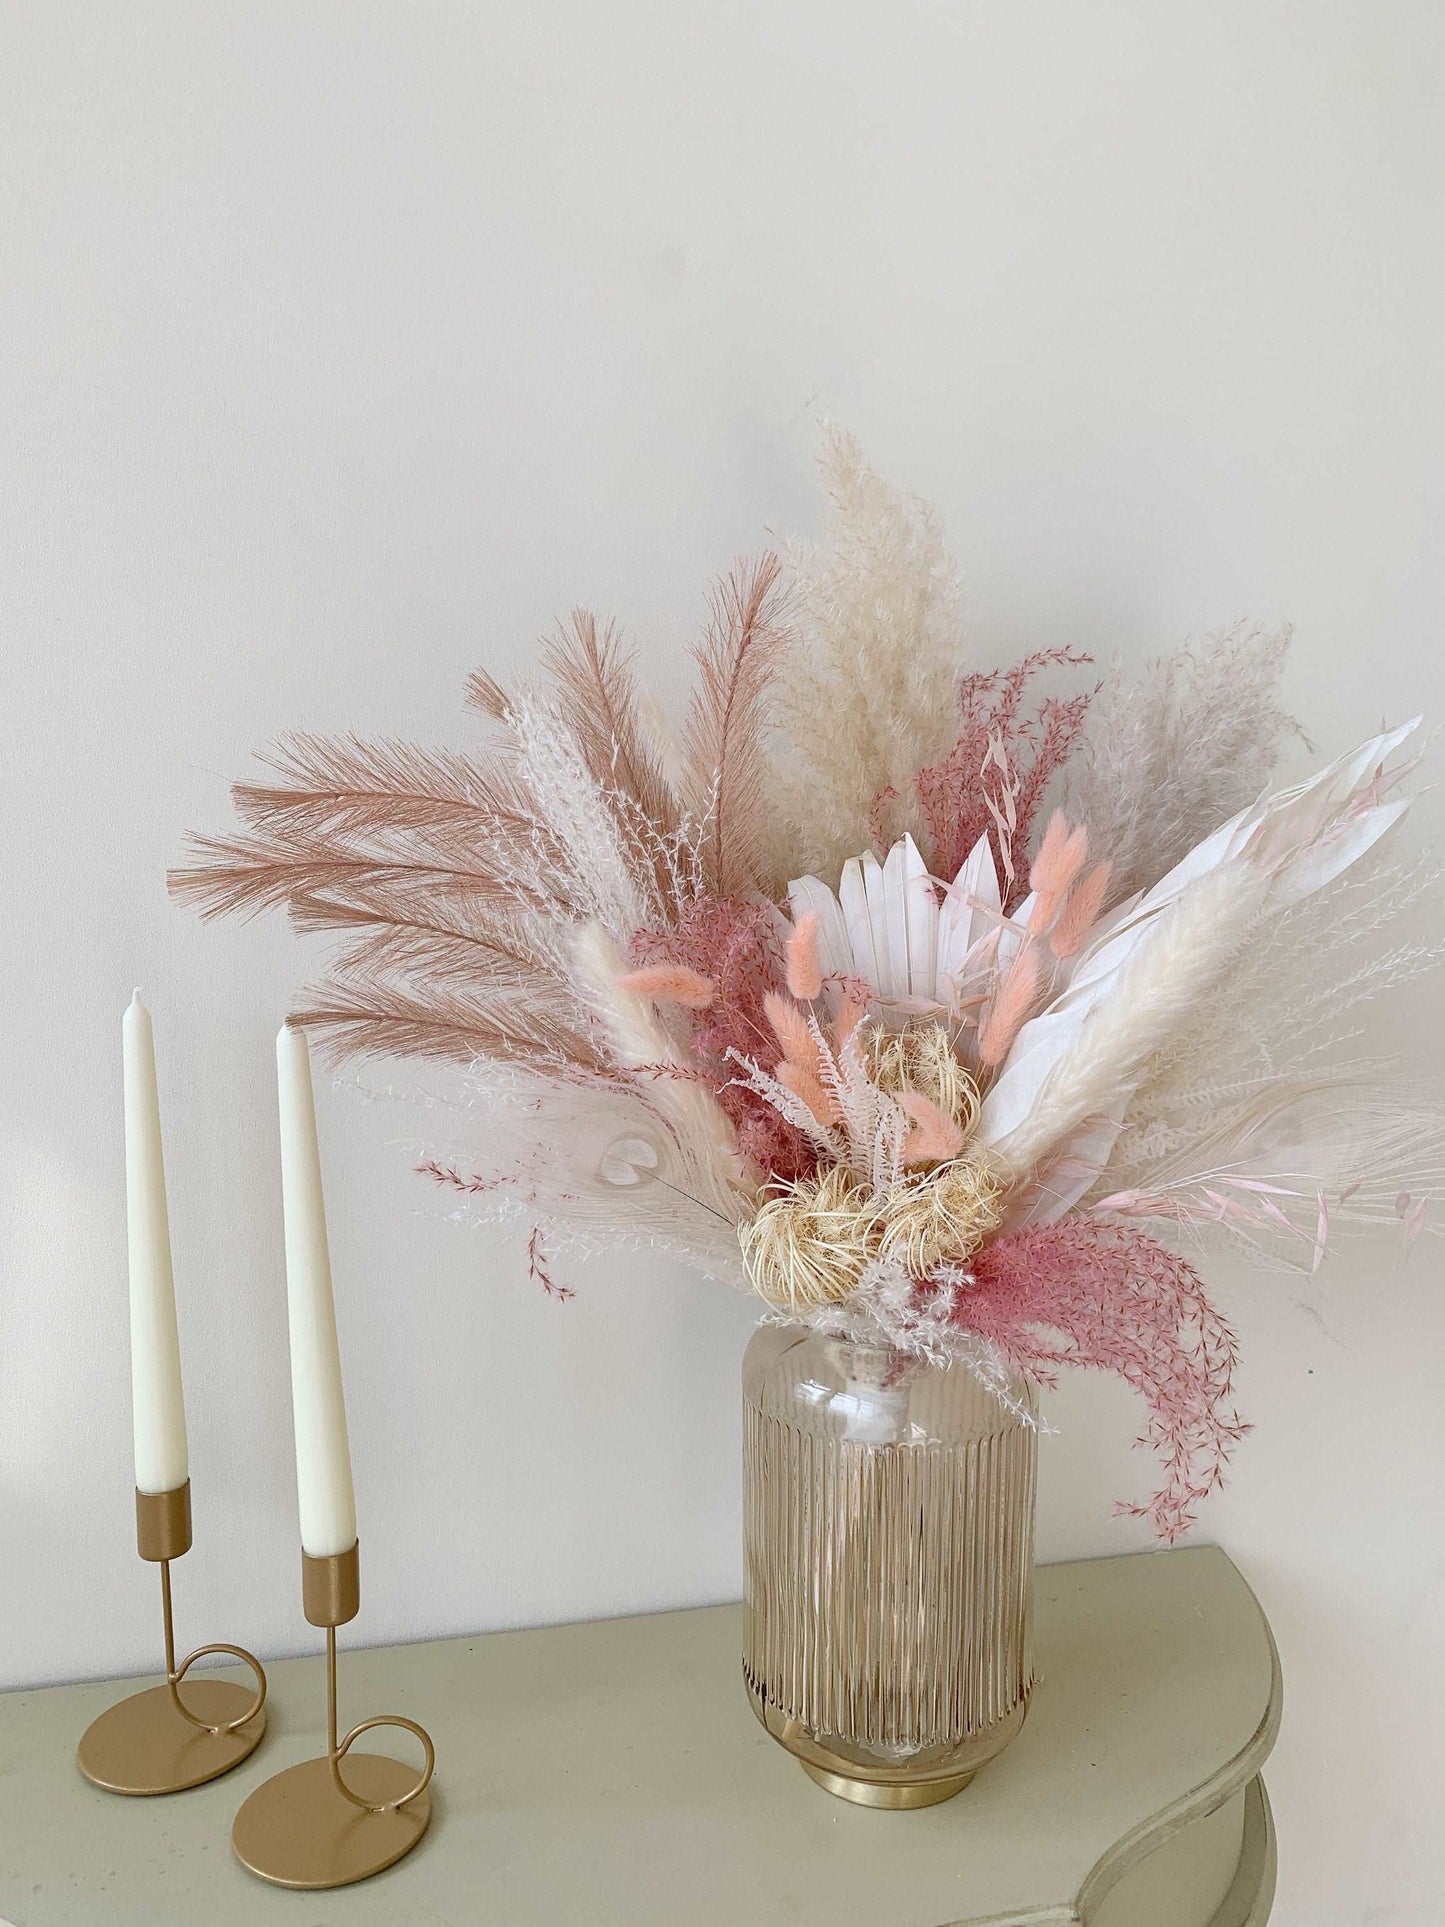 Dried Bouquet, Dusty Pink and White dried Bouquet,Boho Interior Bouquet, Boho Home Decor, Dried flower arrangement , Forever flowers